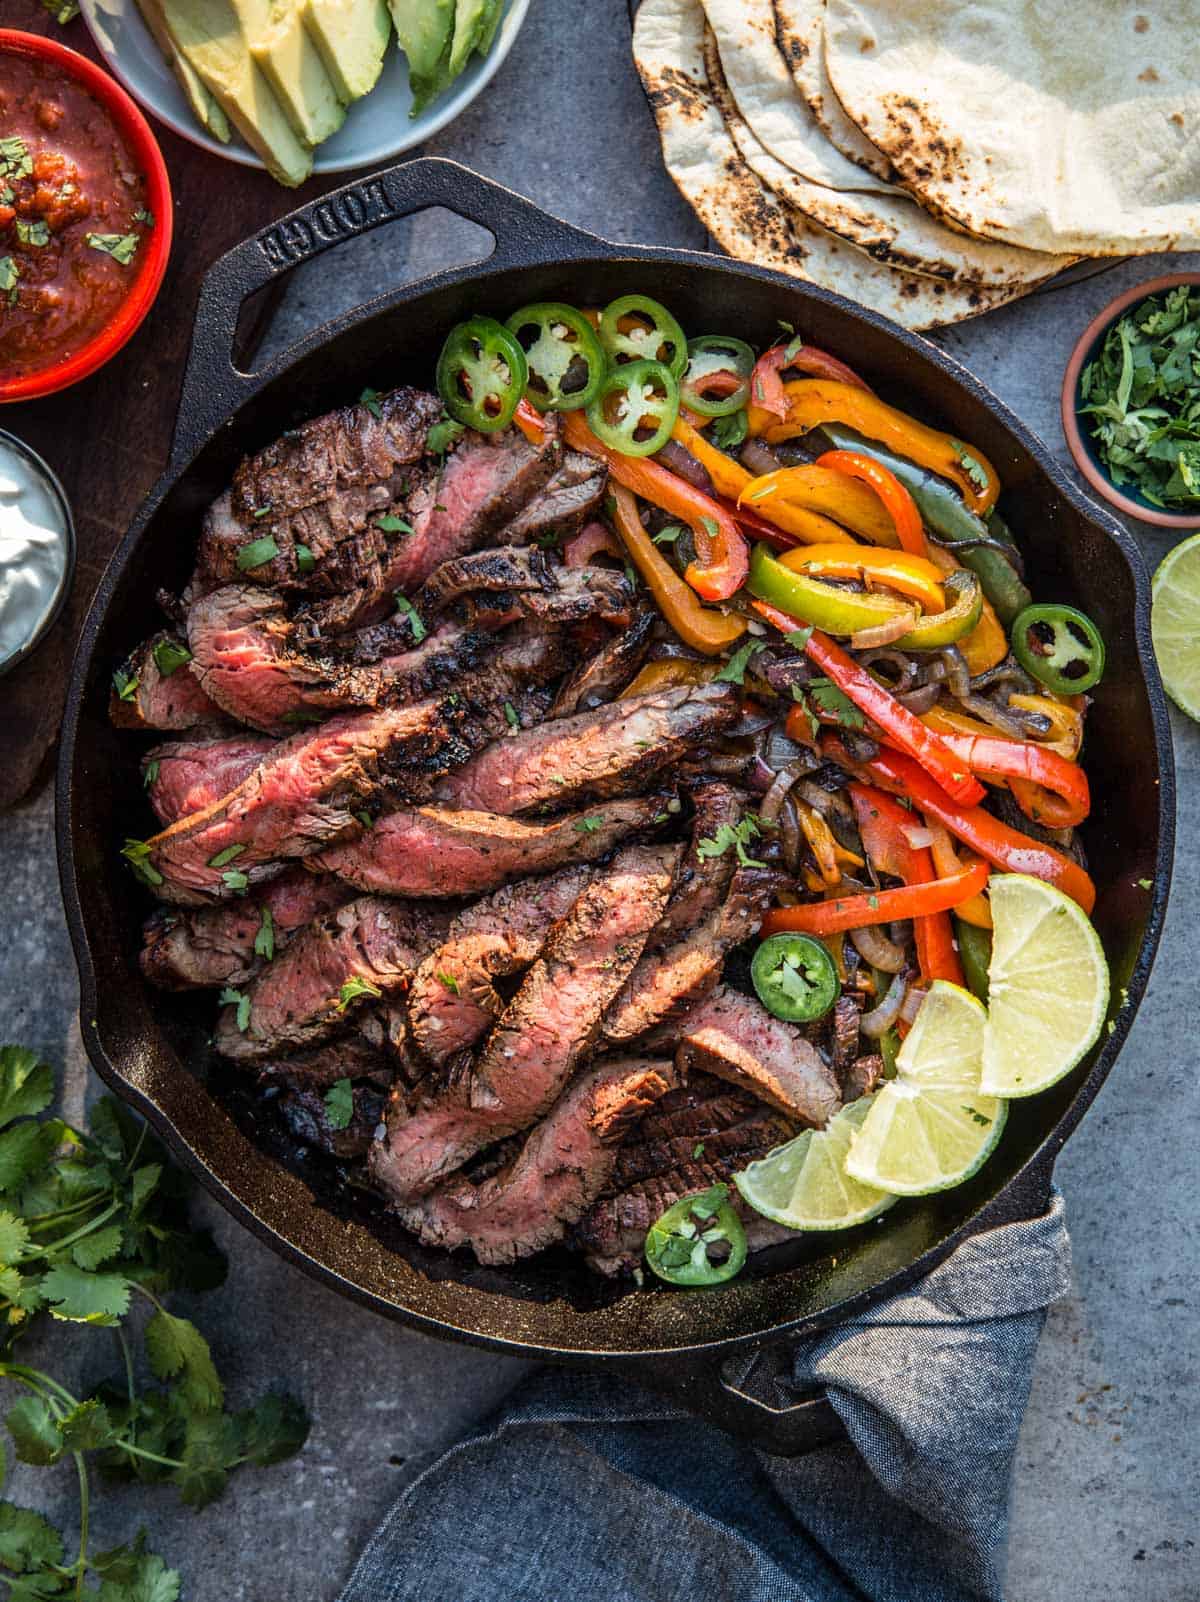 Tequila Marinated Flank Steak Fajitas cooked on the Grill